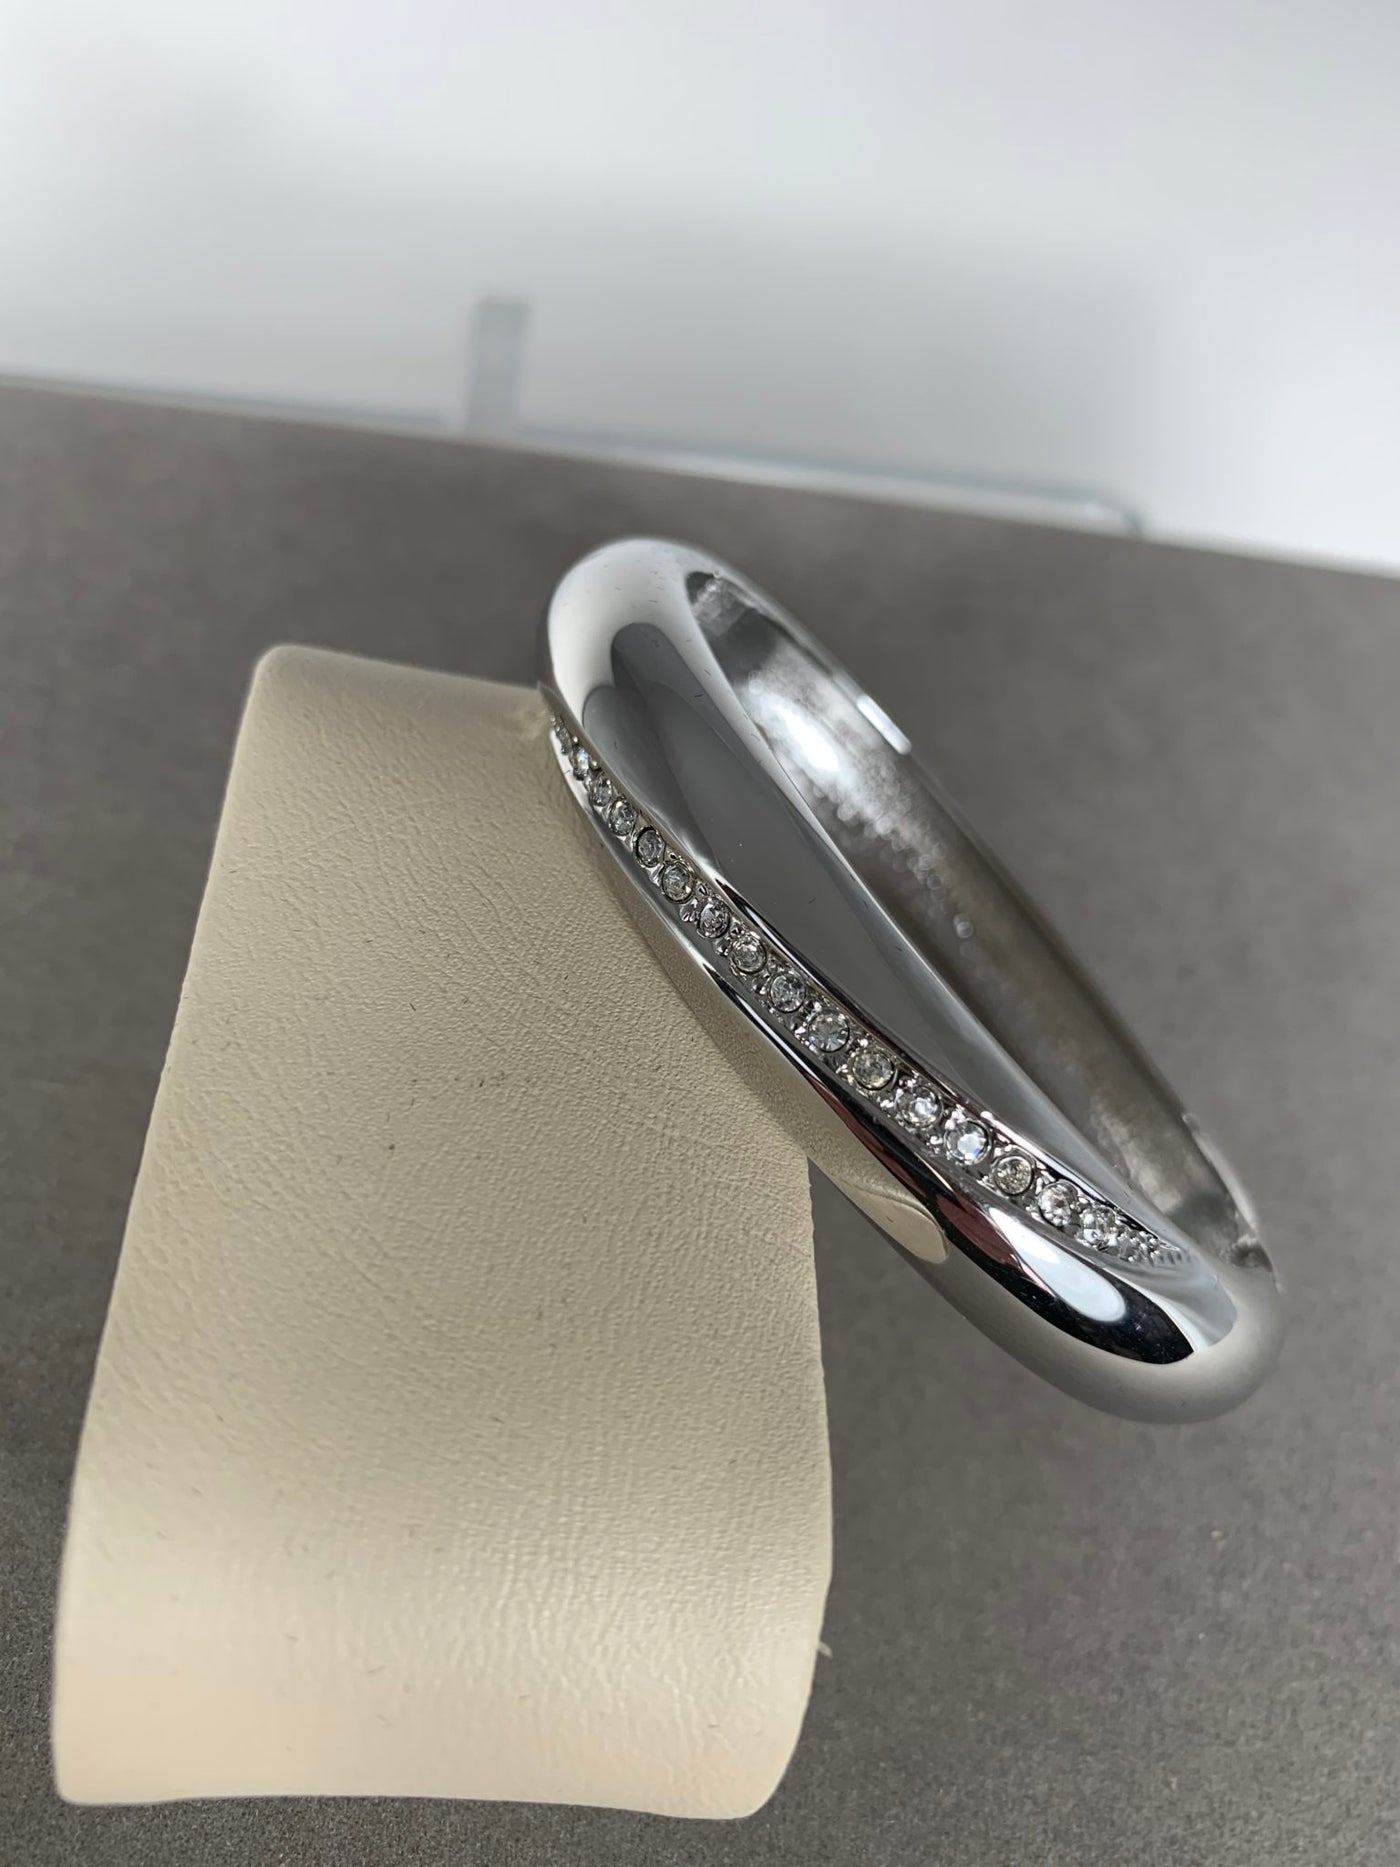 Silver Tone Bangle with Crystal Accents